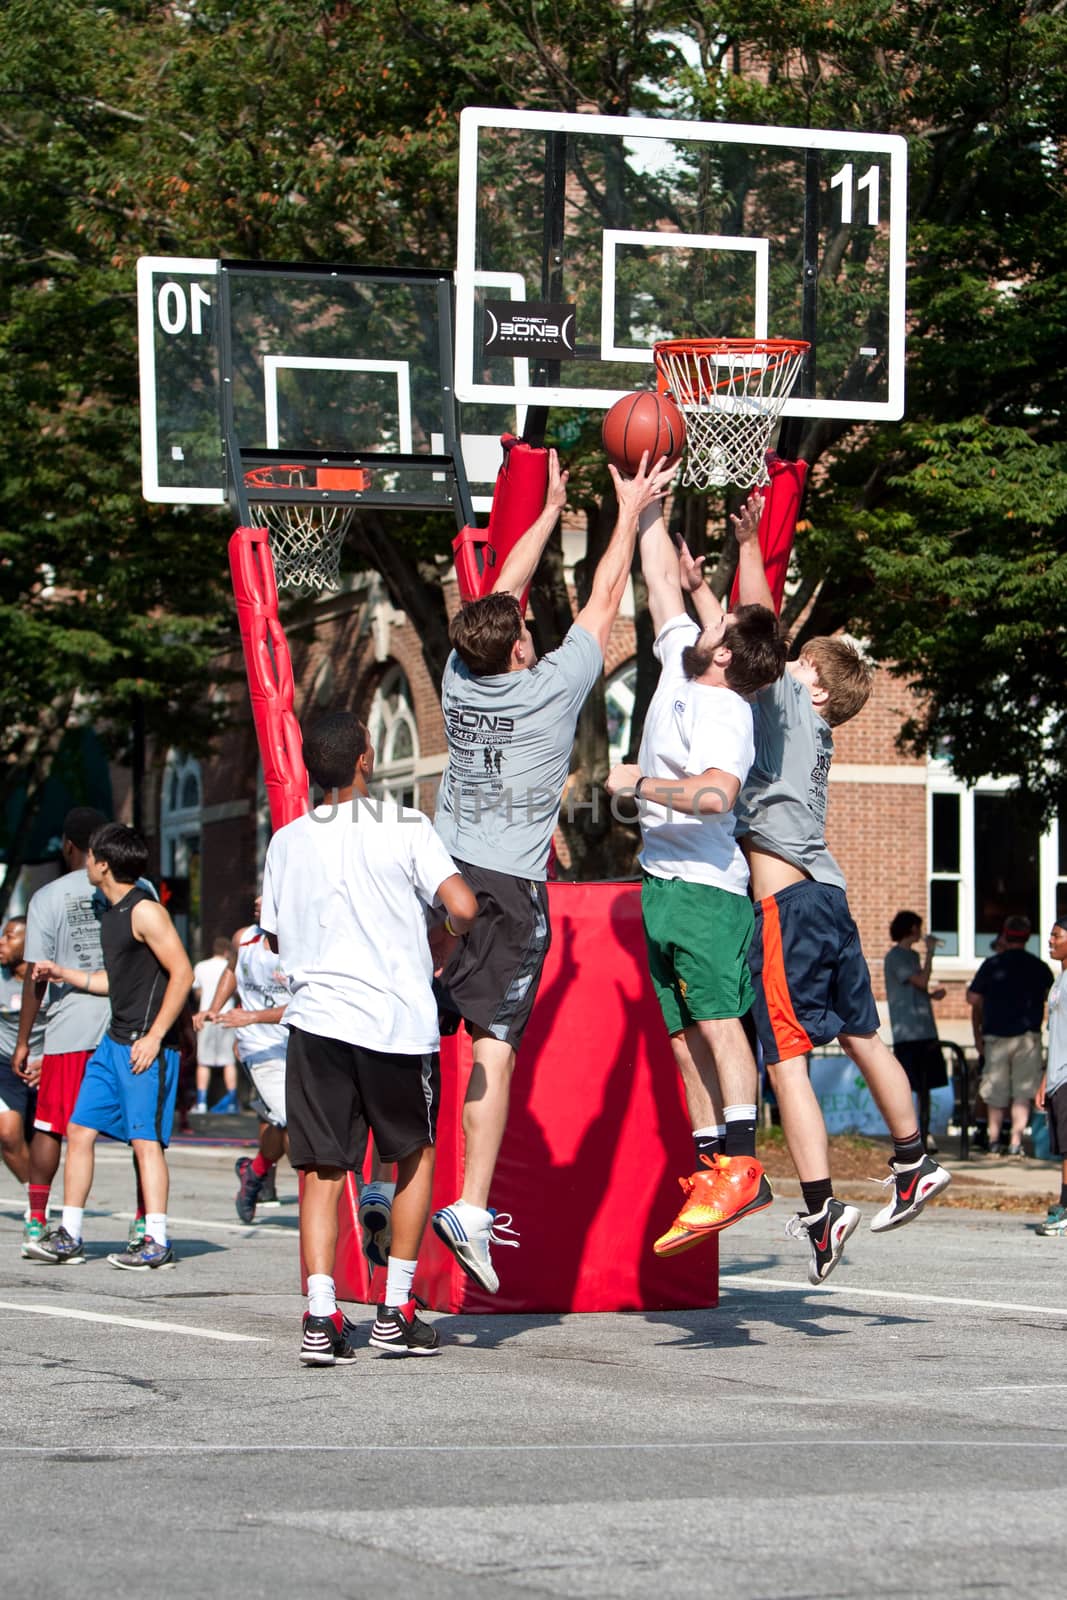 Athens, GA, USA - August 24, 2013:  Three men jump battling for the ball in a 3-on-3 basketball tournament held on the streets of downtown Athens.